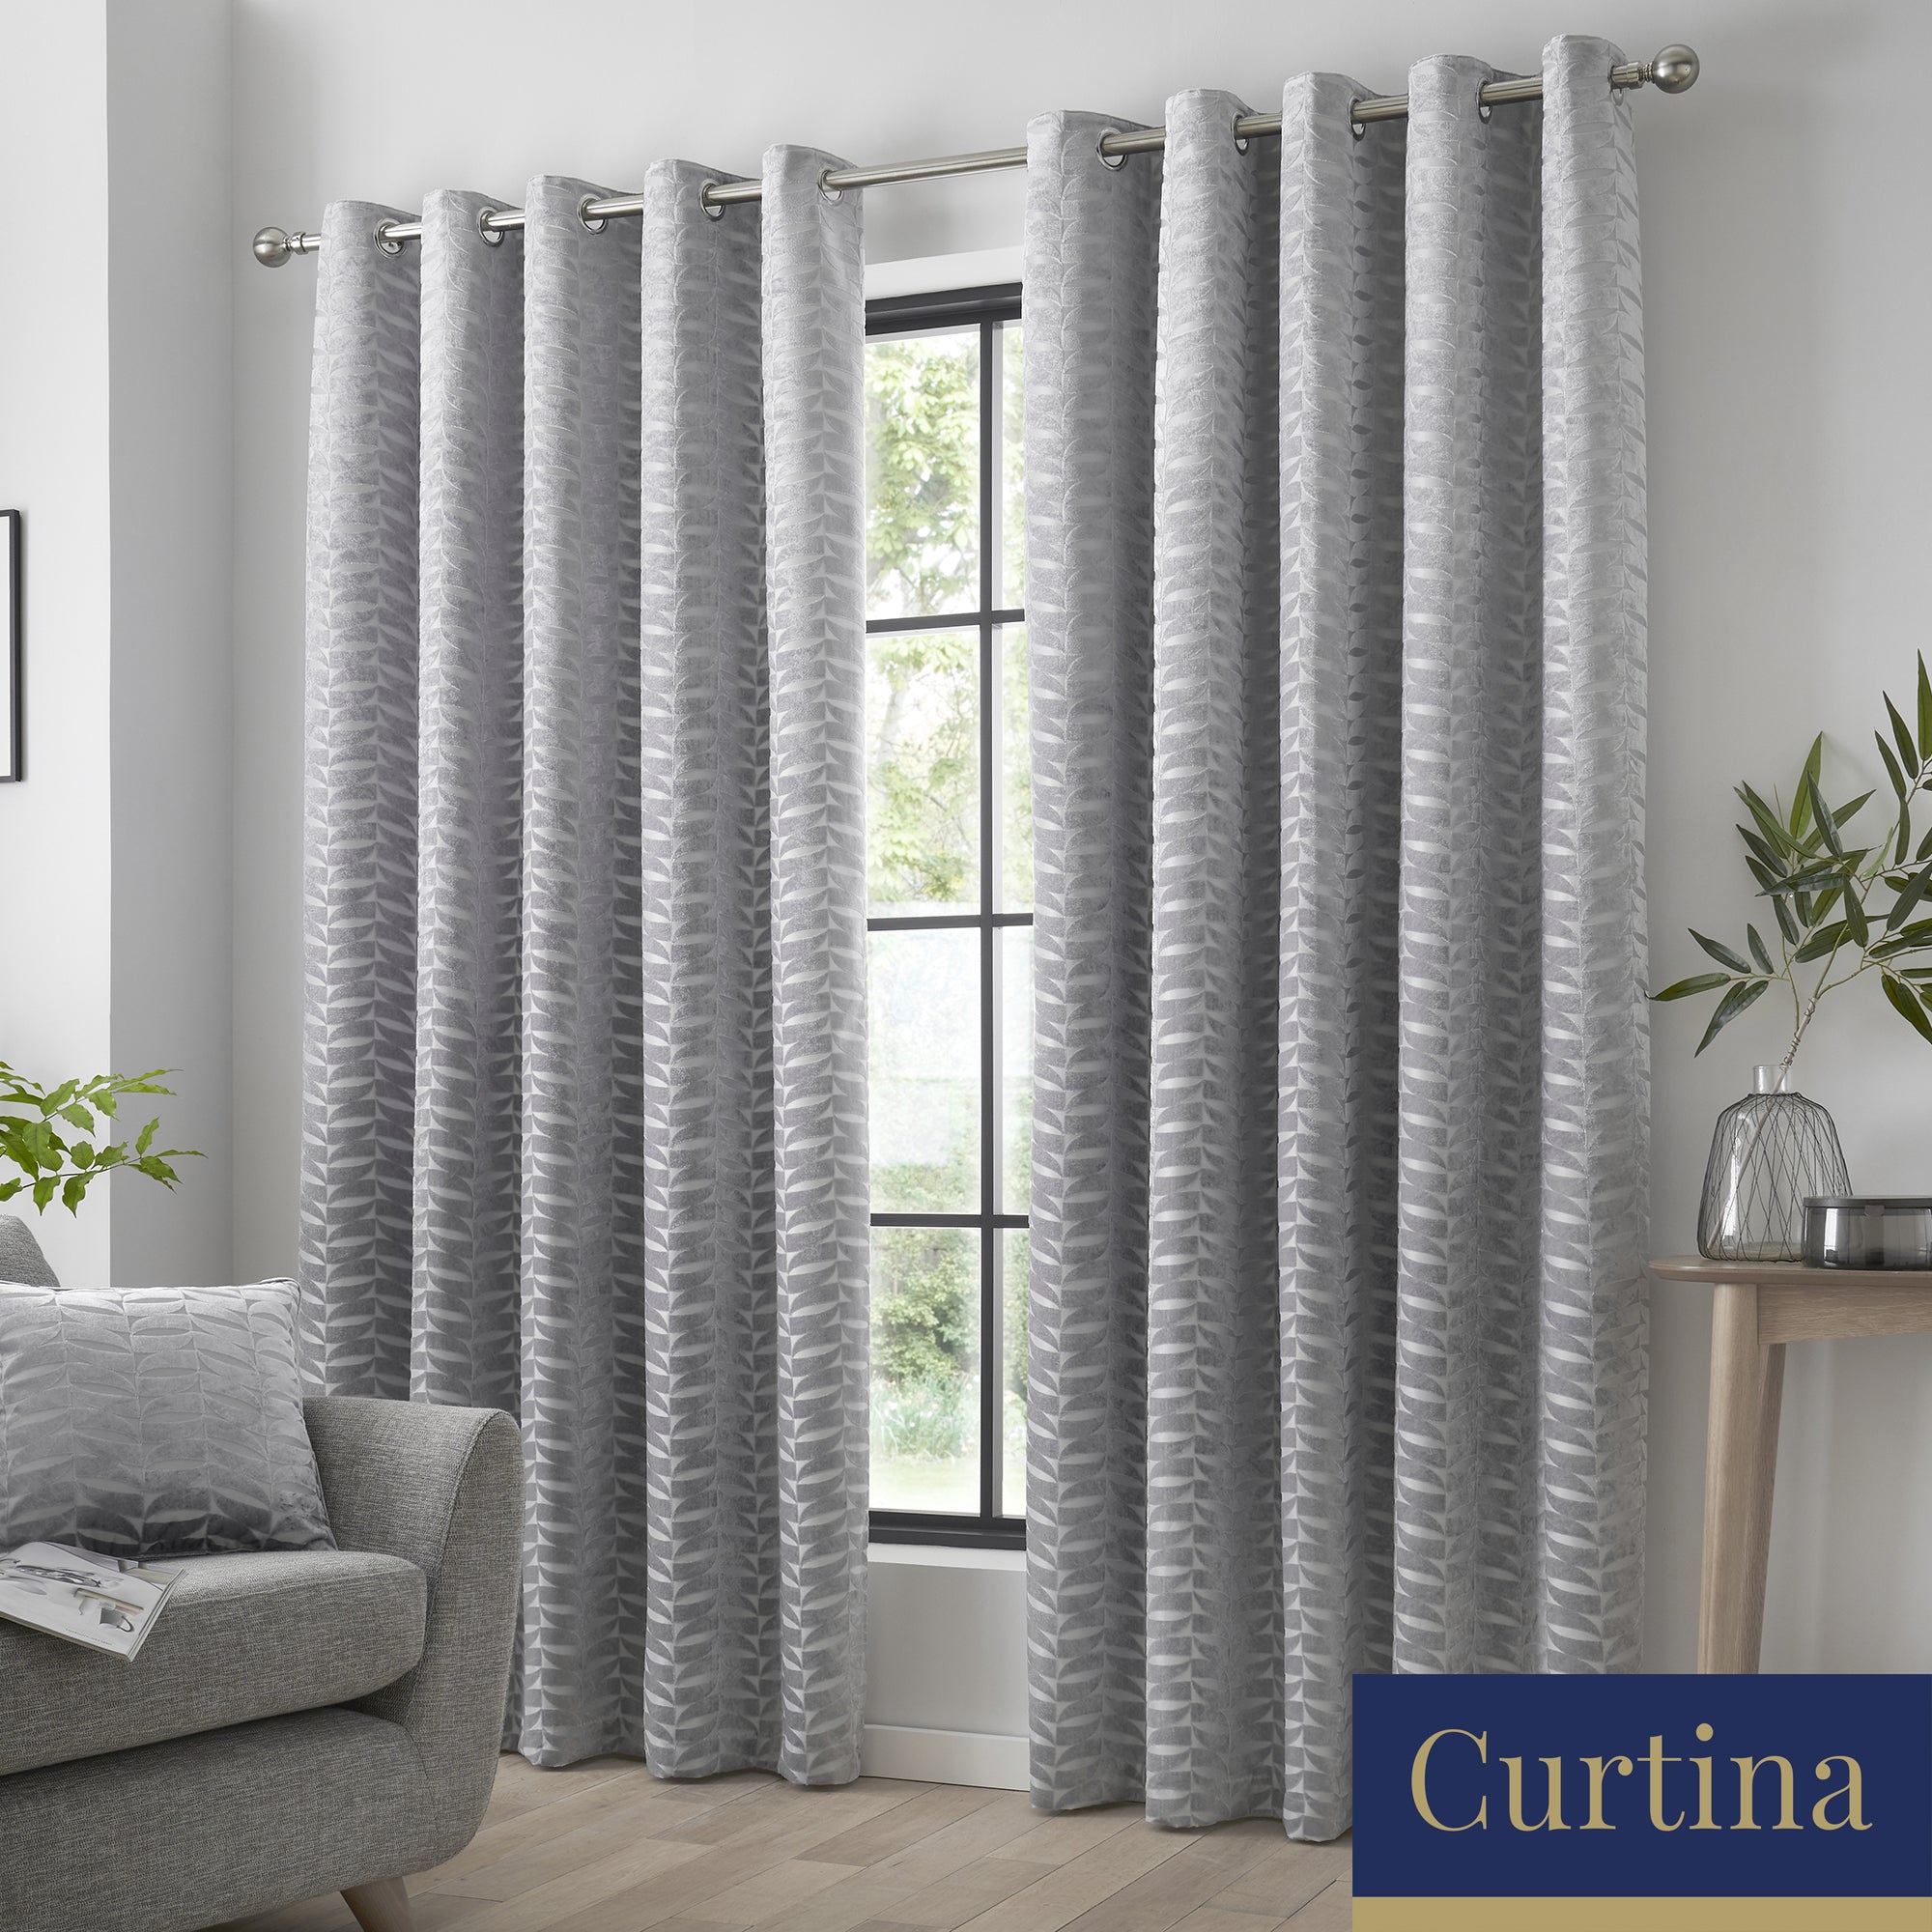 Kendal - Geometric Jacquard Eyelet Curtains in Silver - By Curtina